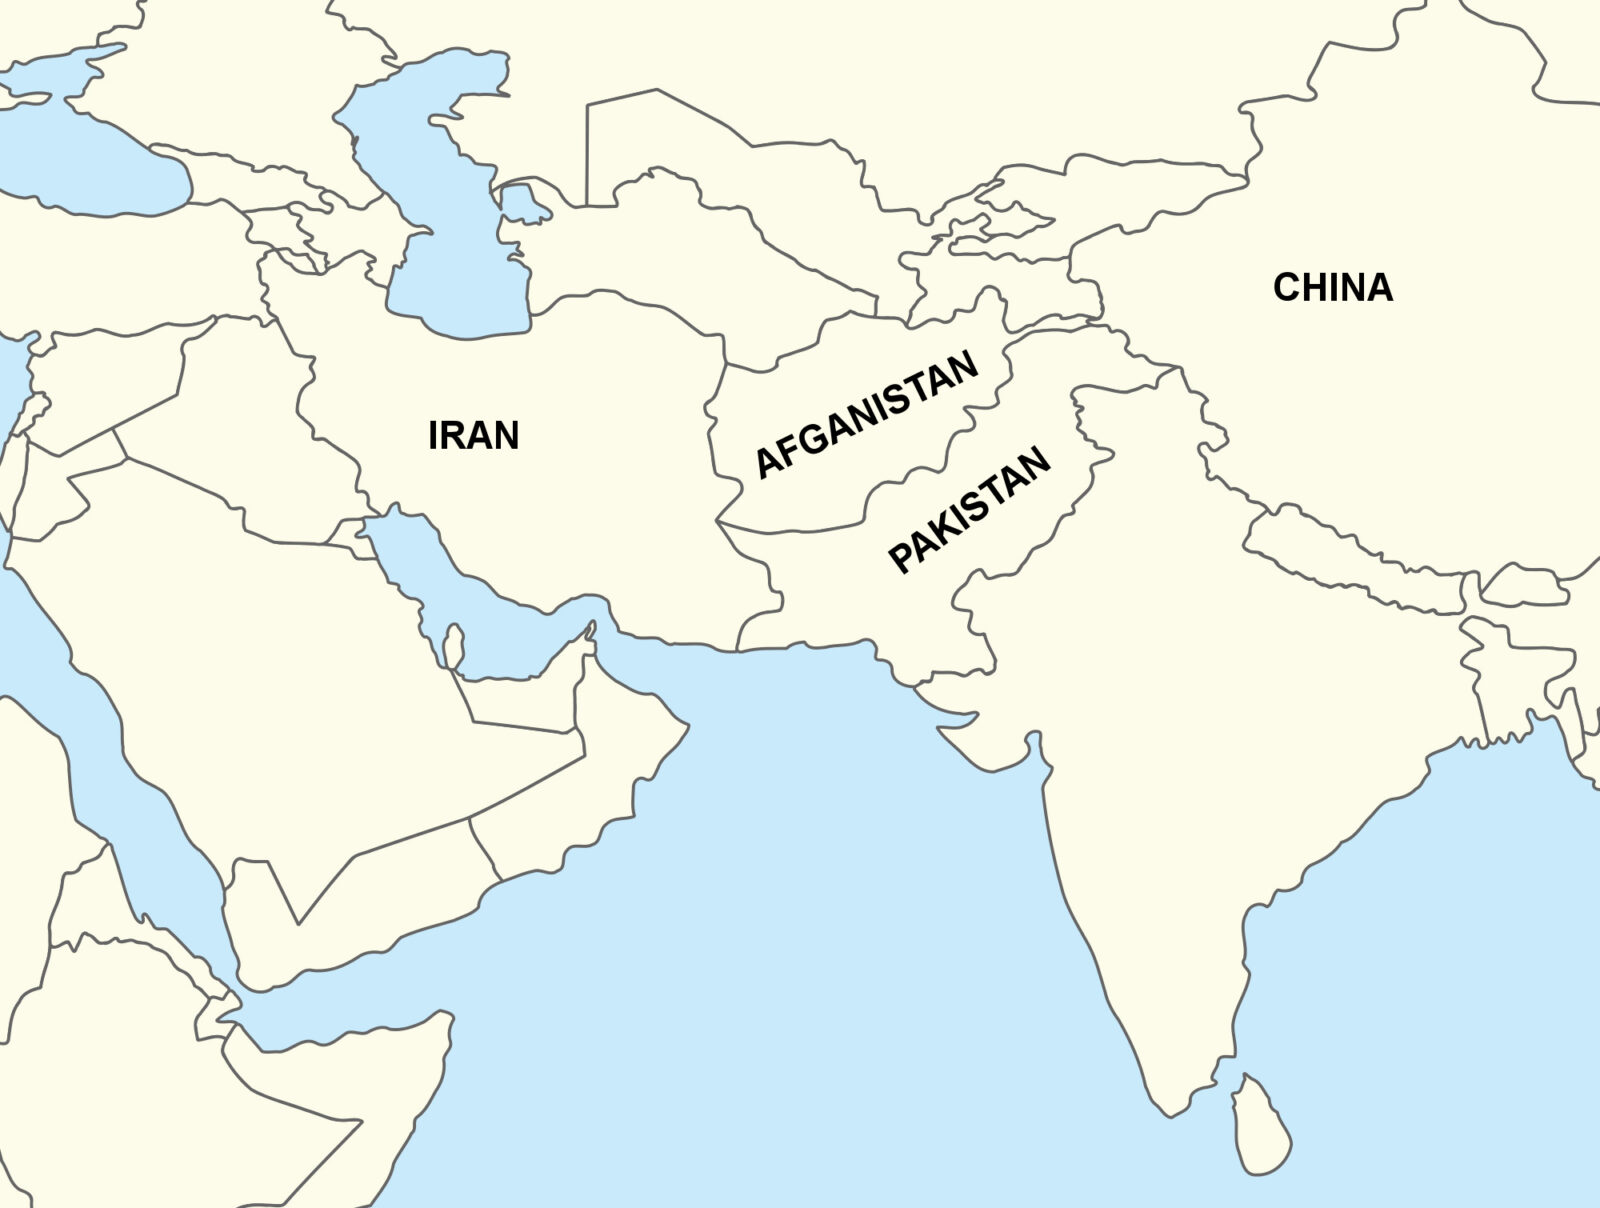 Map of Central Asia